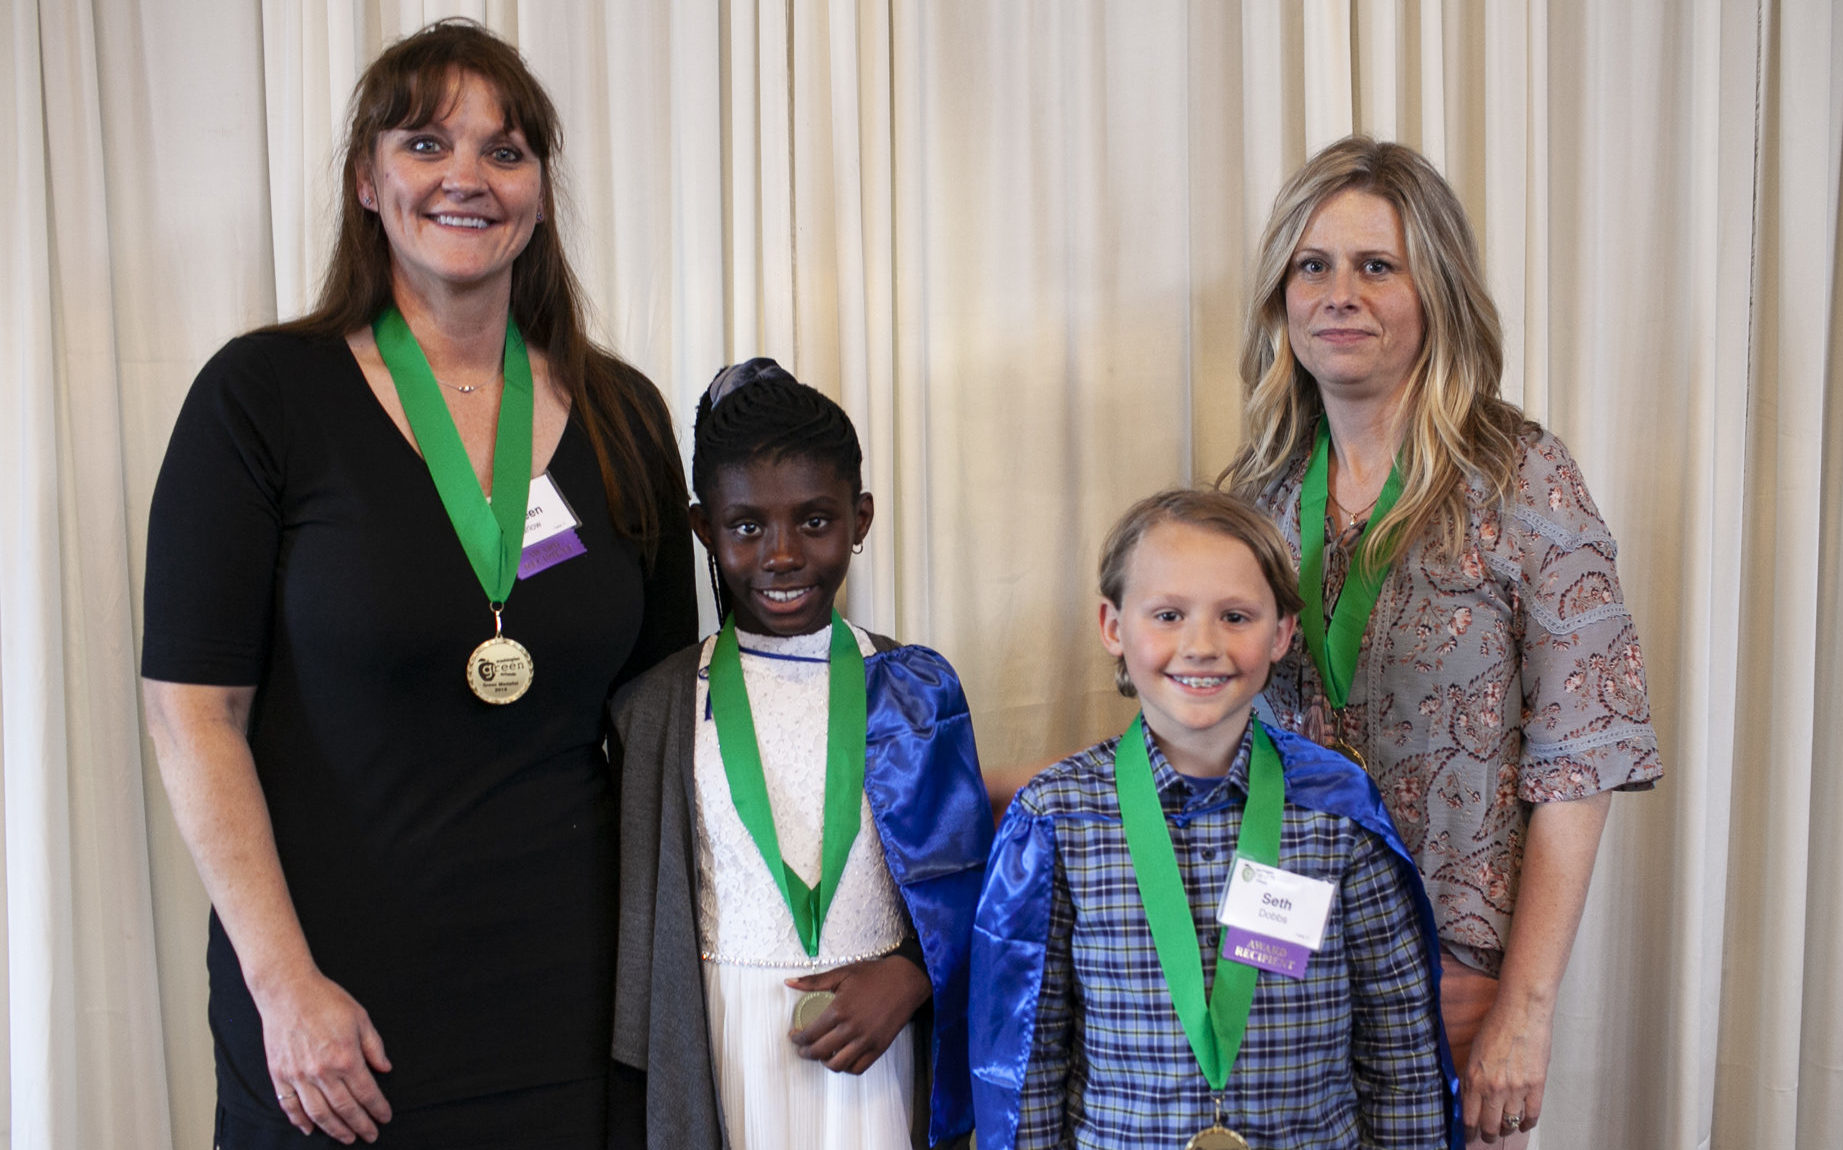 A group of 2 students and 2 teachers stands smiling at the camera with green medals around their necks.